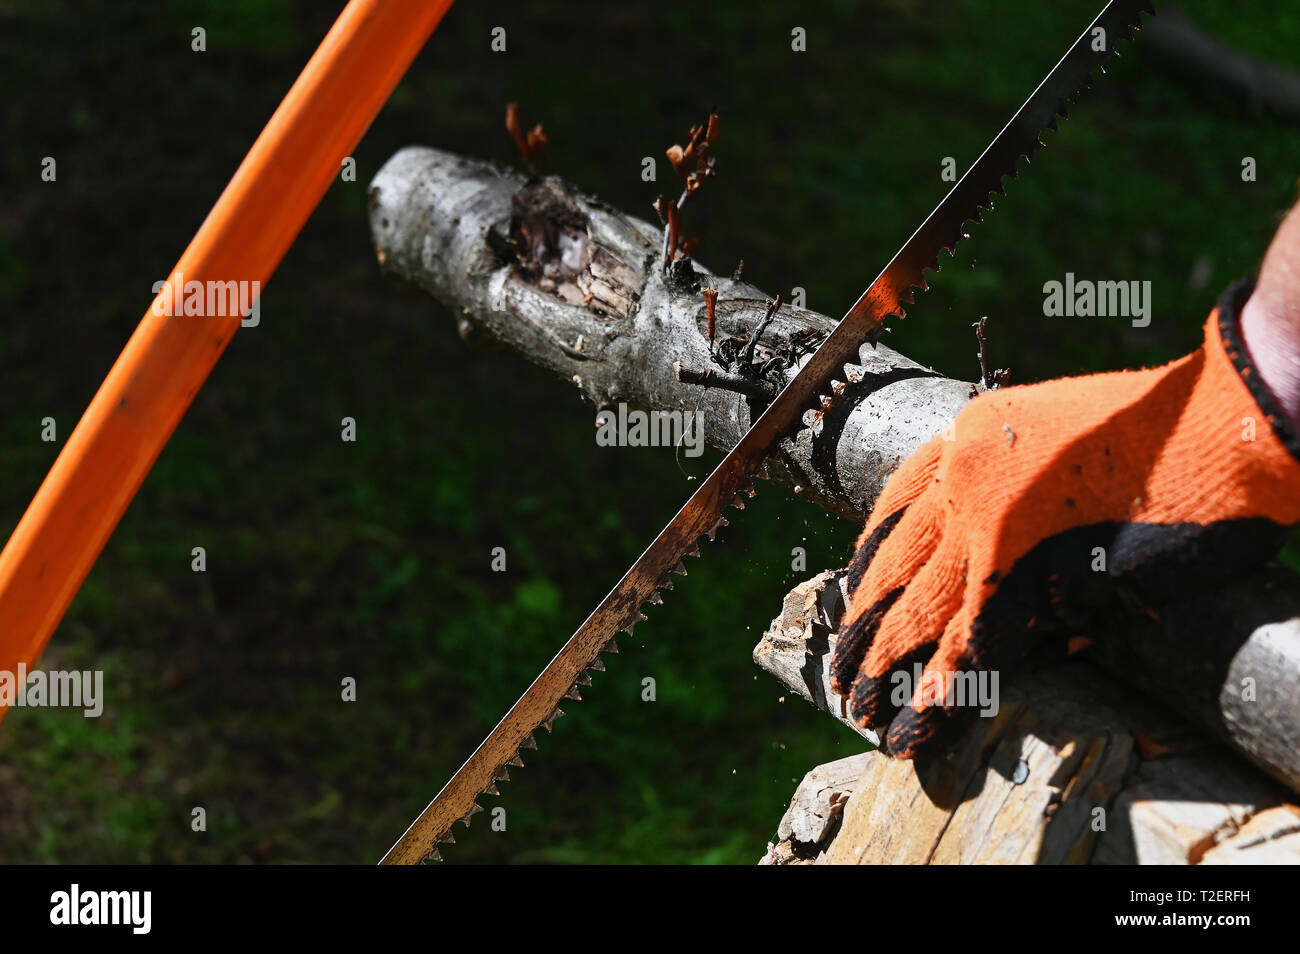 A hand saw being used to saw a large branch for firewood, held by a hand in an orange glove Stock Photo